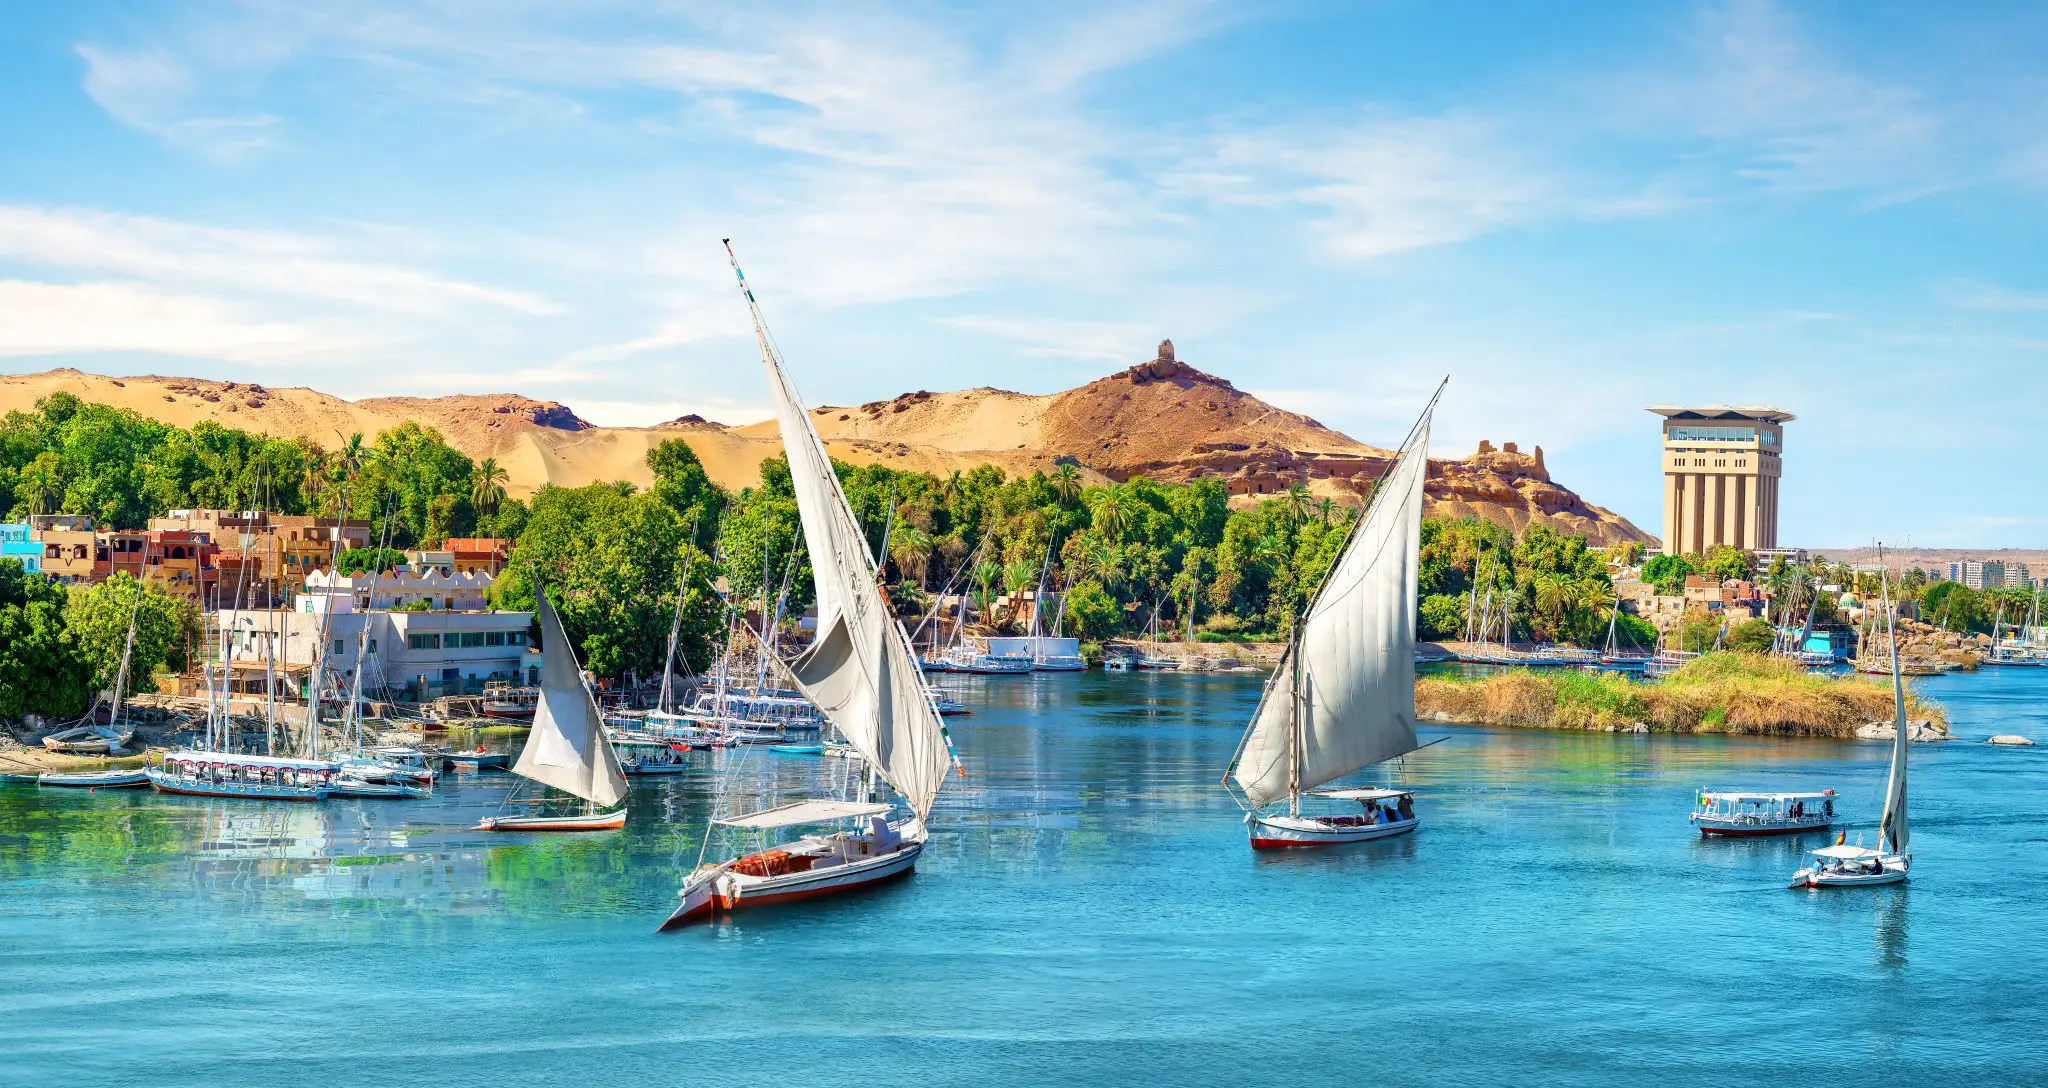 Explore Best Places to Visit In Egypt: Ancient Wonders, Vibrant Cities, and Breathtaking Scenery Await!